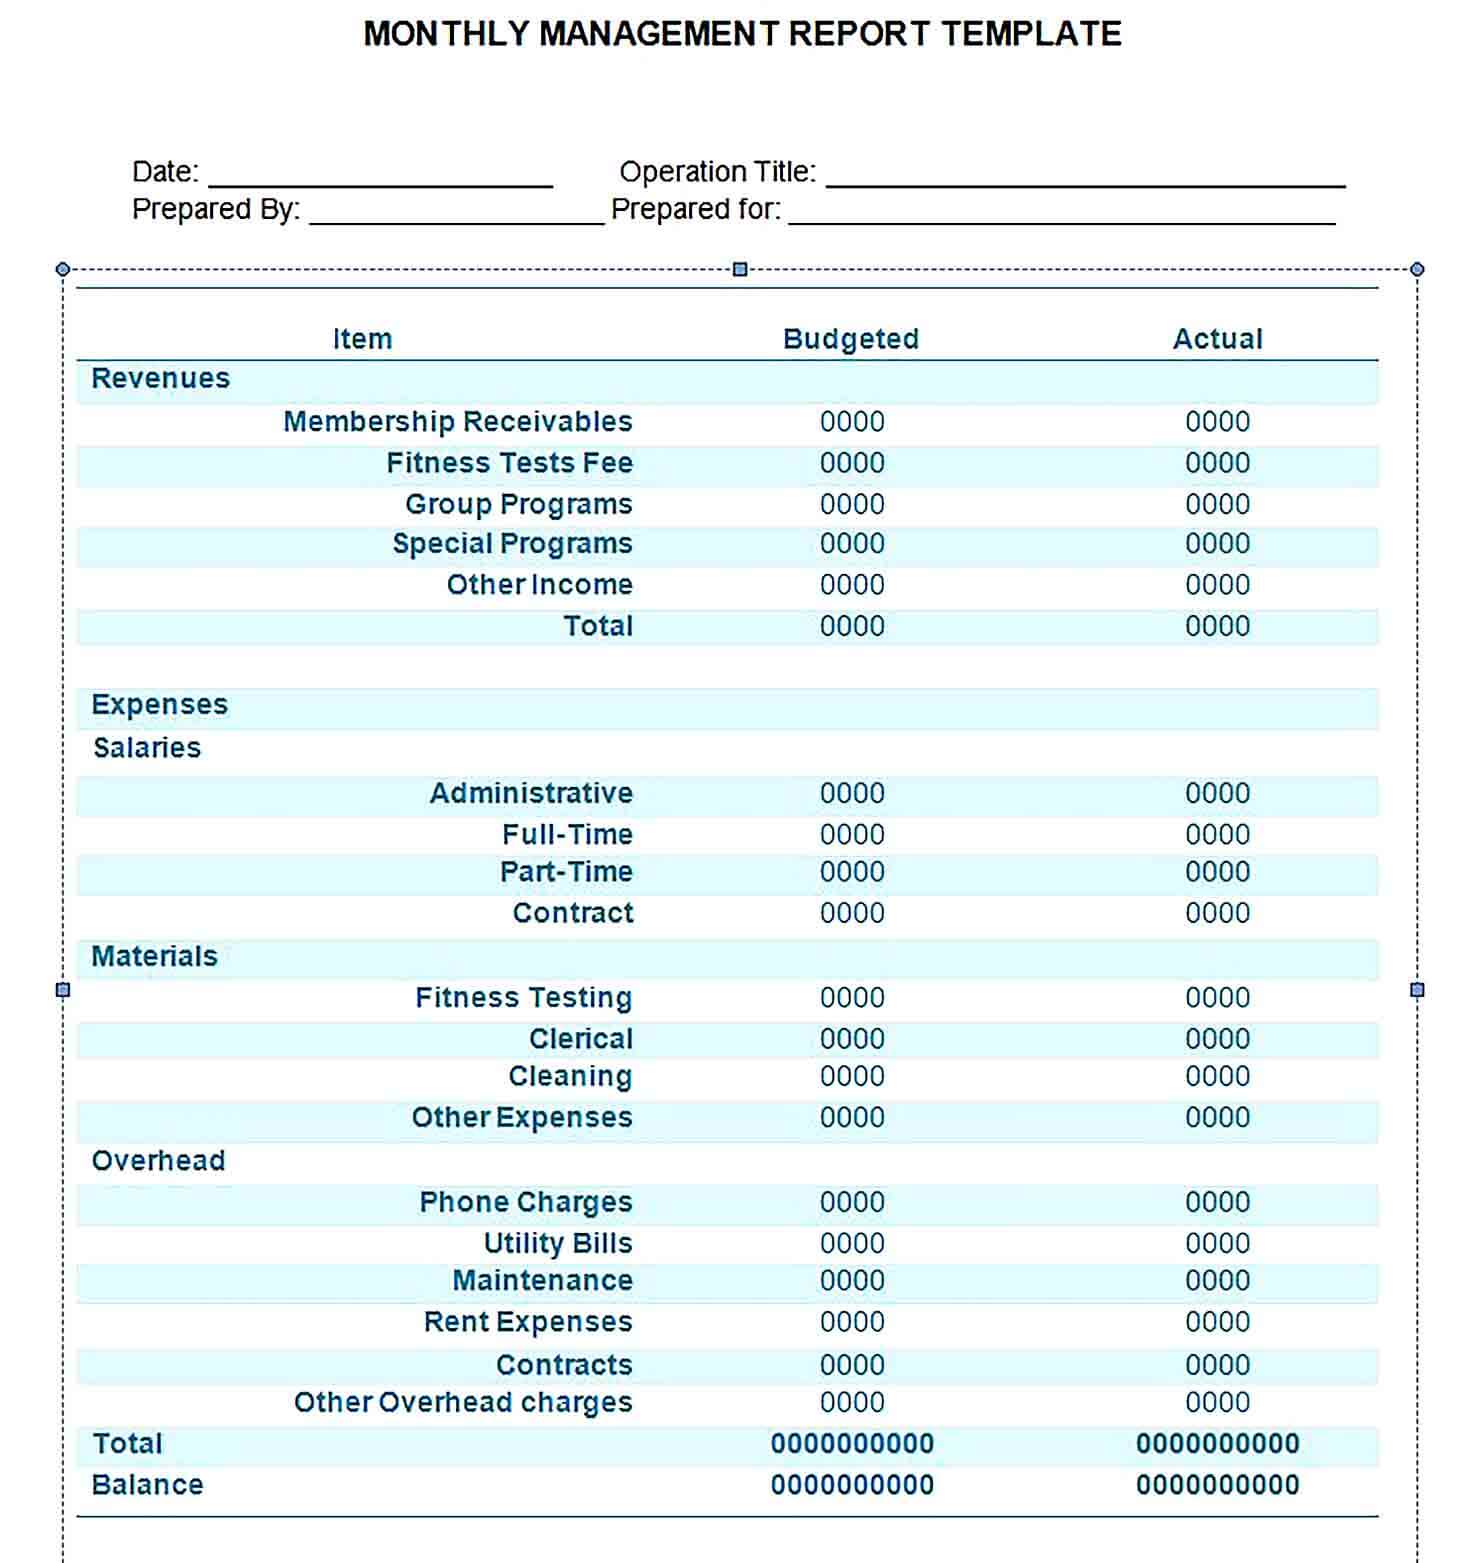 Sample Monthly Management Report Template in Word